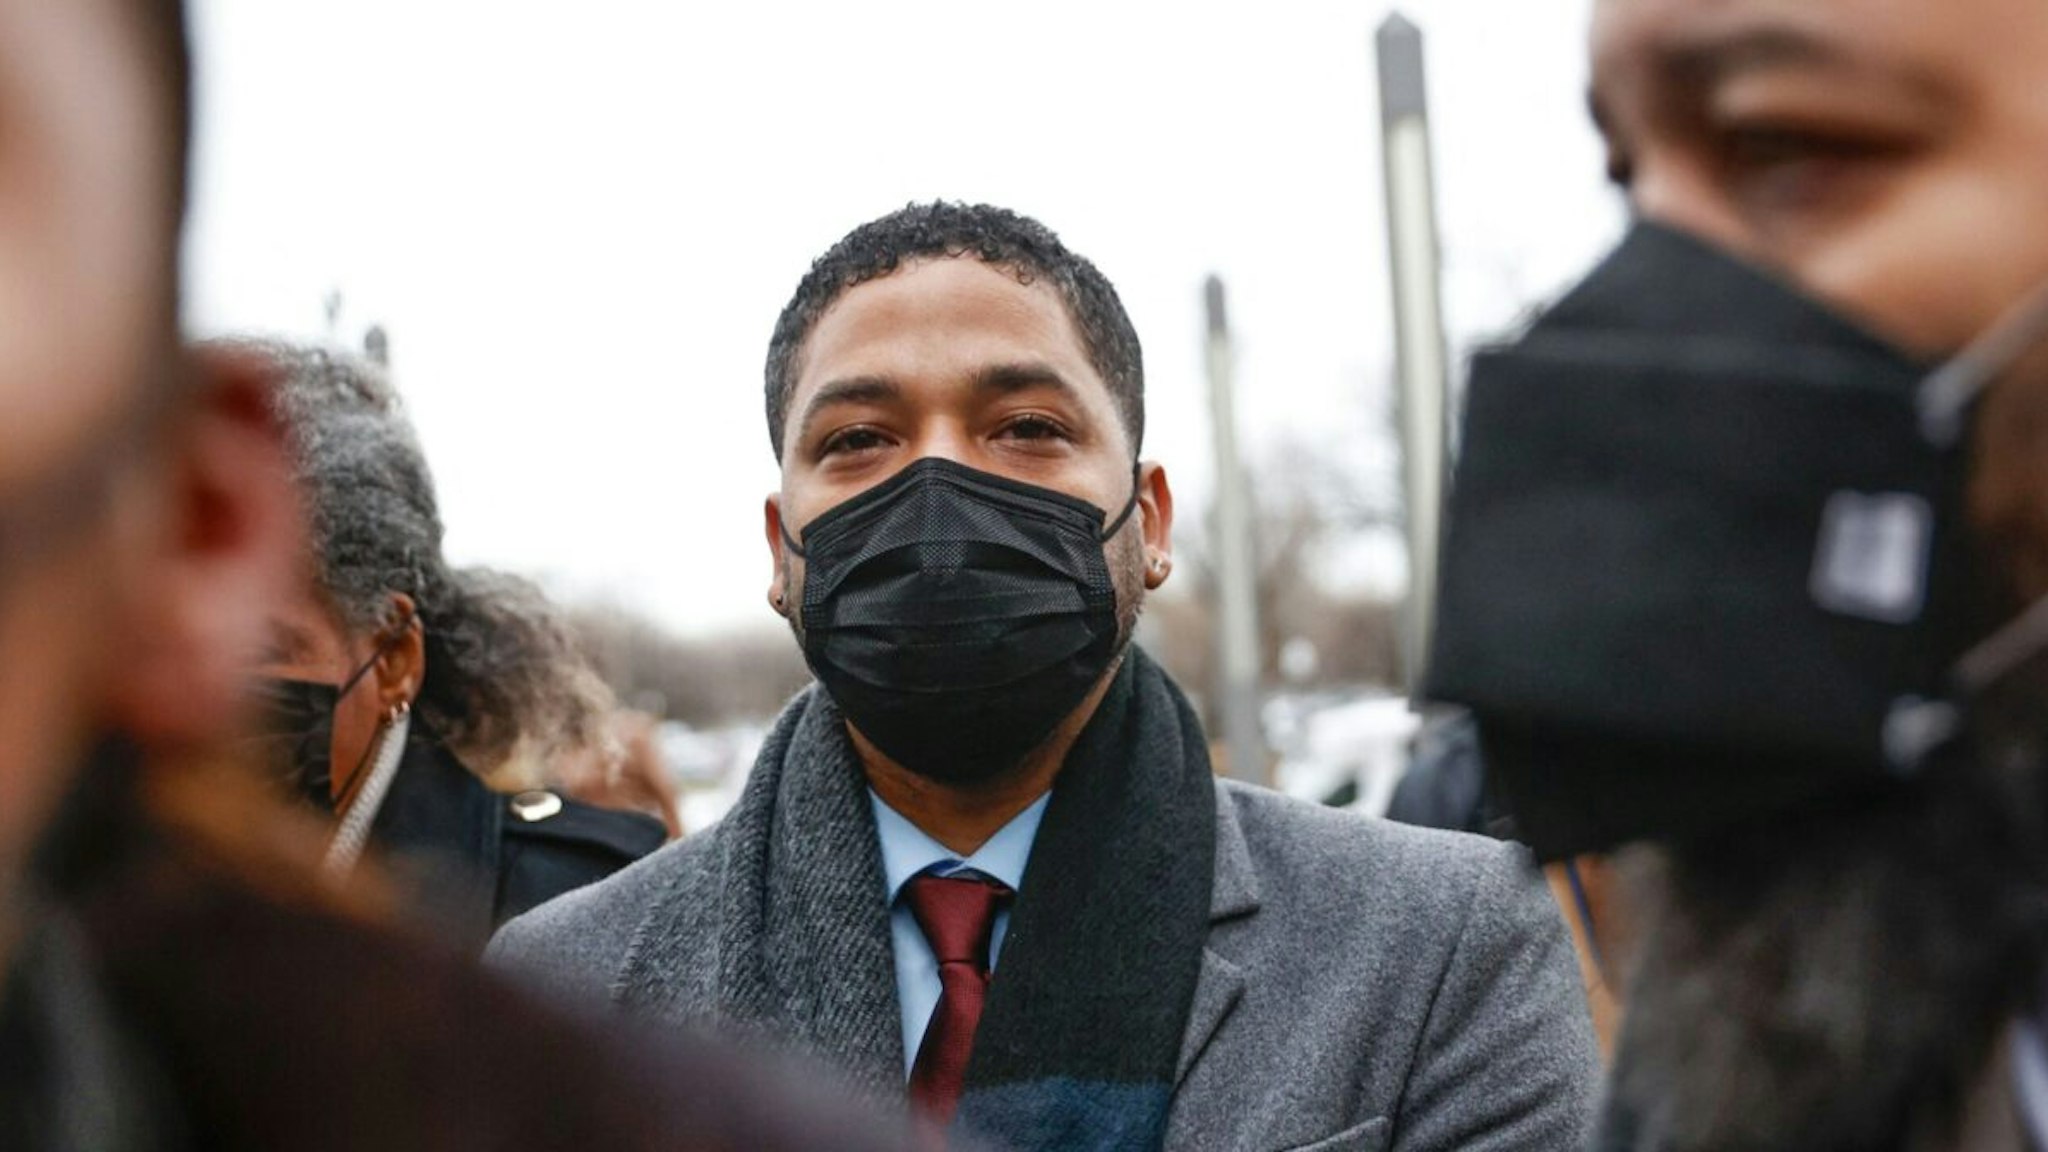 Jussie Smollett arrives at the Leighton Criminal Court Building for his trial on disorderly conduct charges on December 6 2021 in Chicago, Illinois